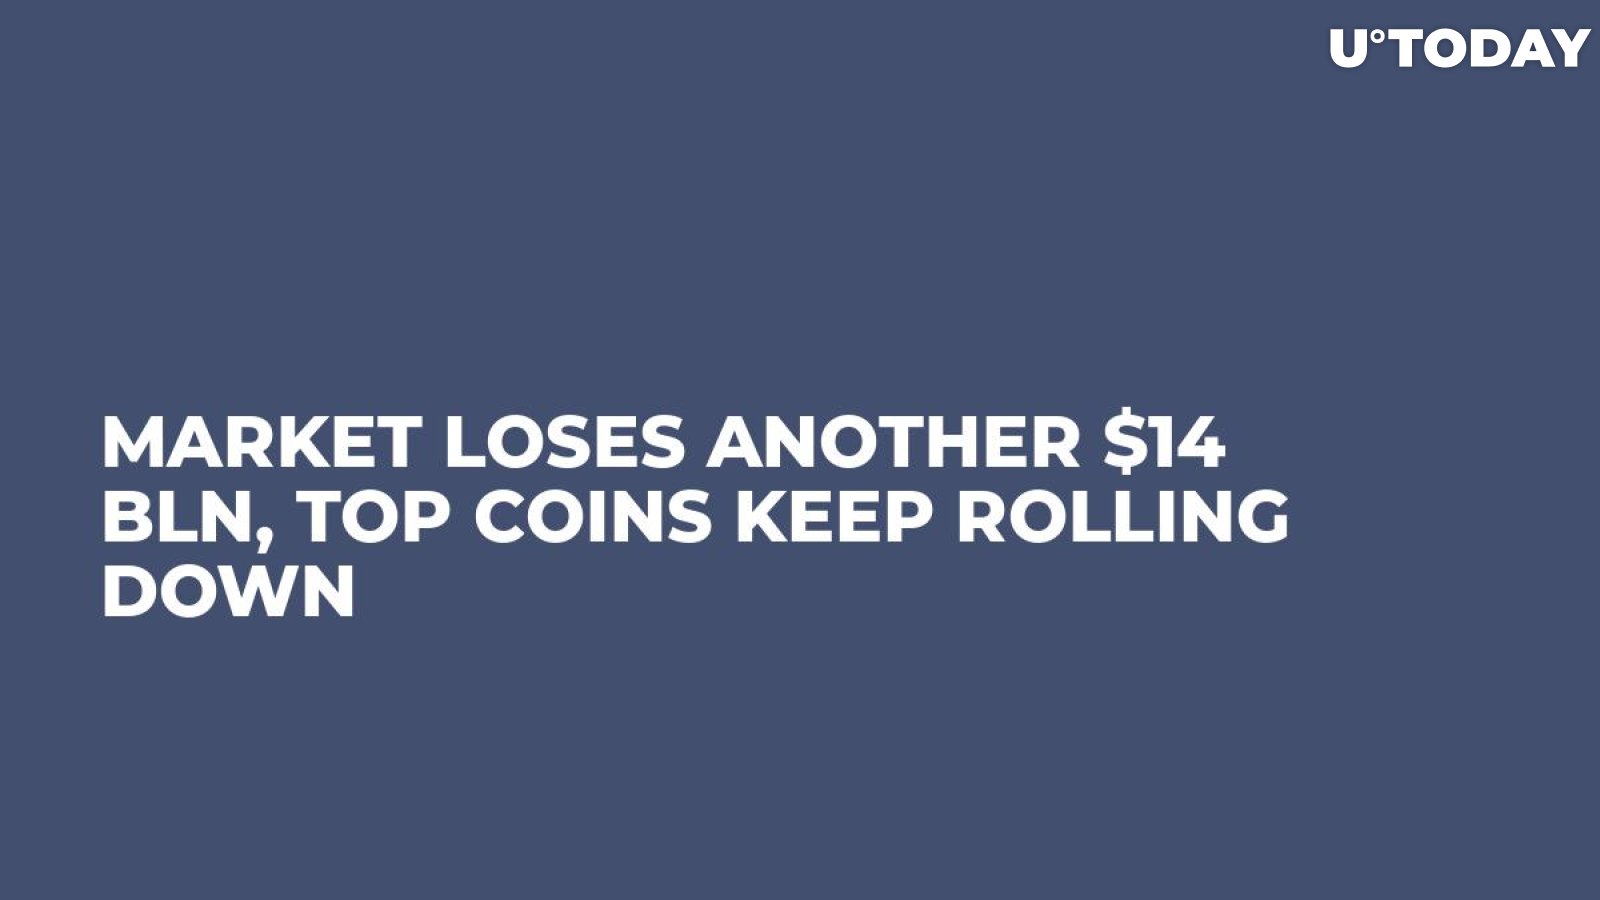 Market Loses Another $14 Bln, Top Coins Keep Rolling Down